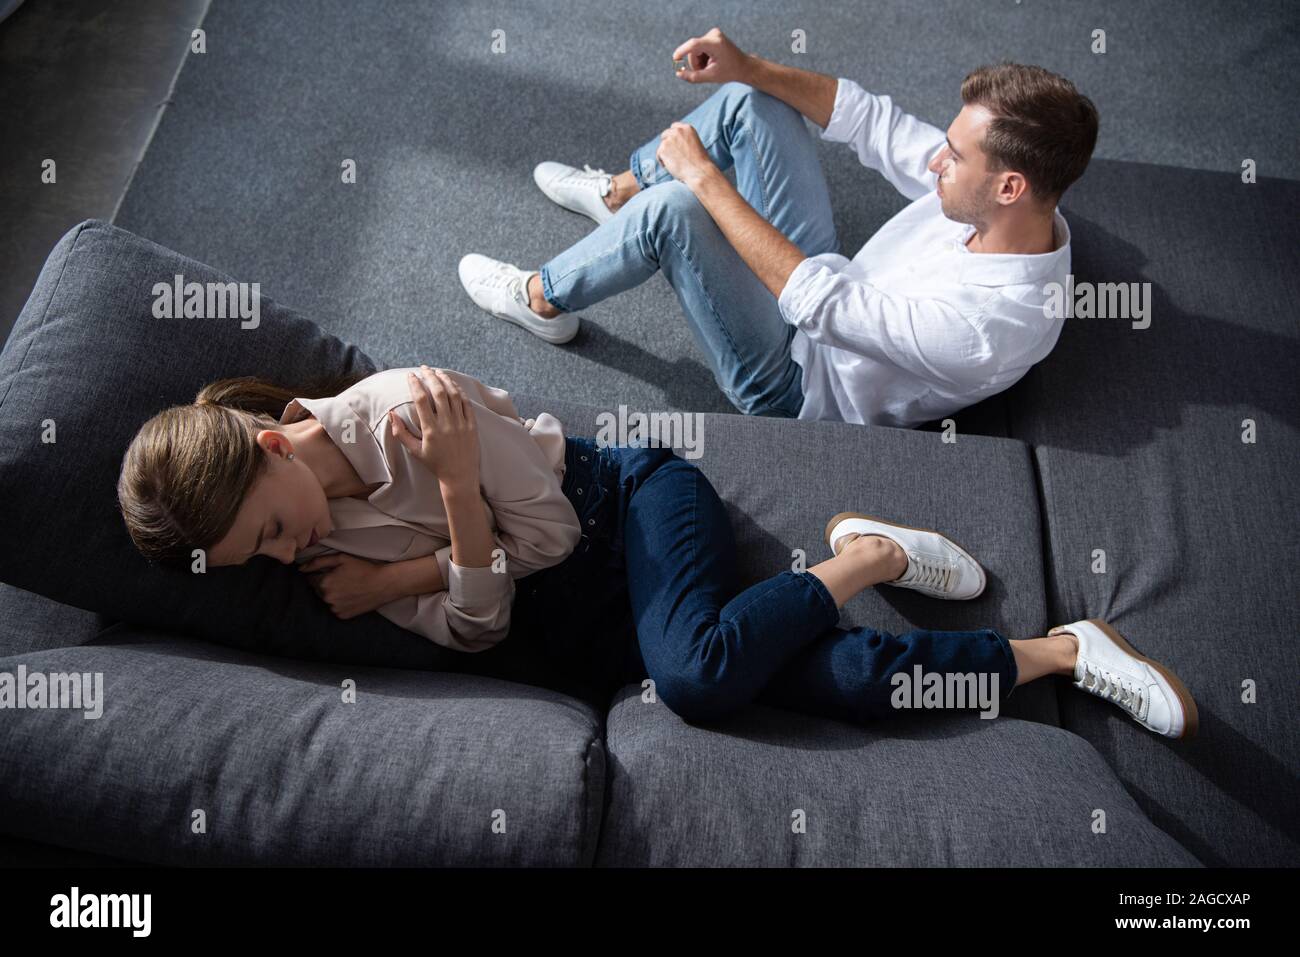 overhead view of crying woman lying on sofa and man sitting on floor Stock Photo